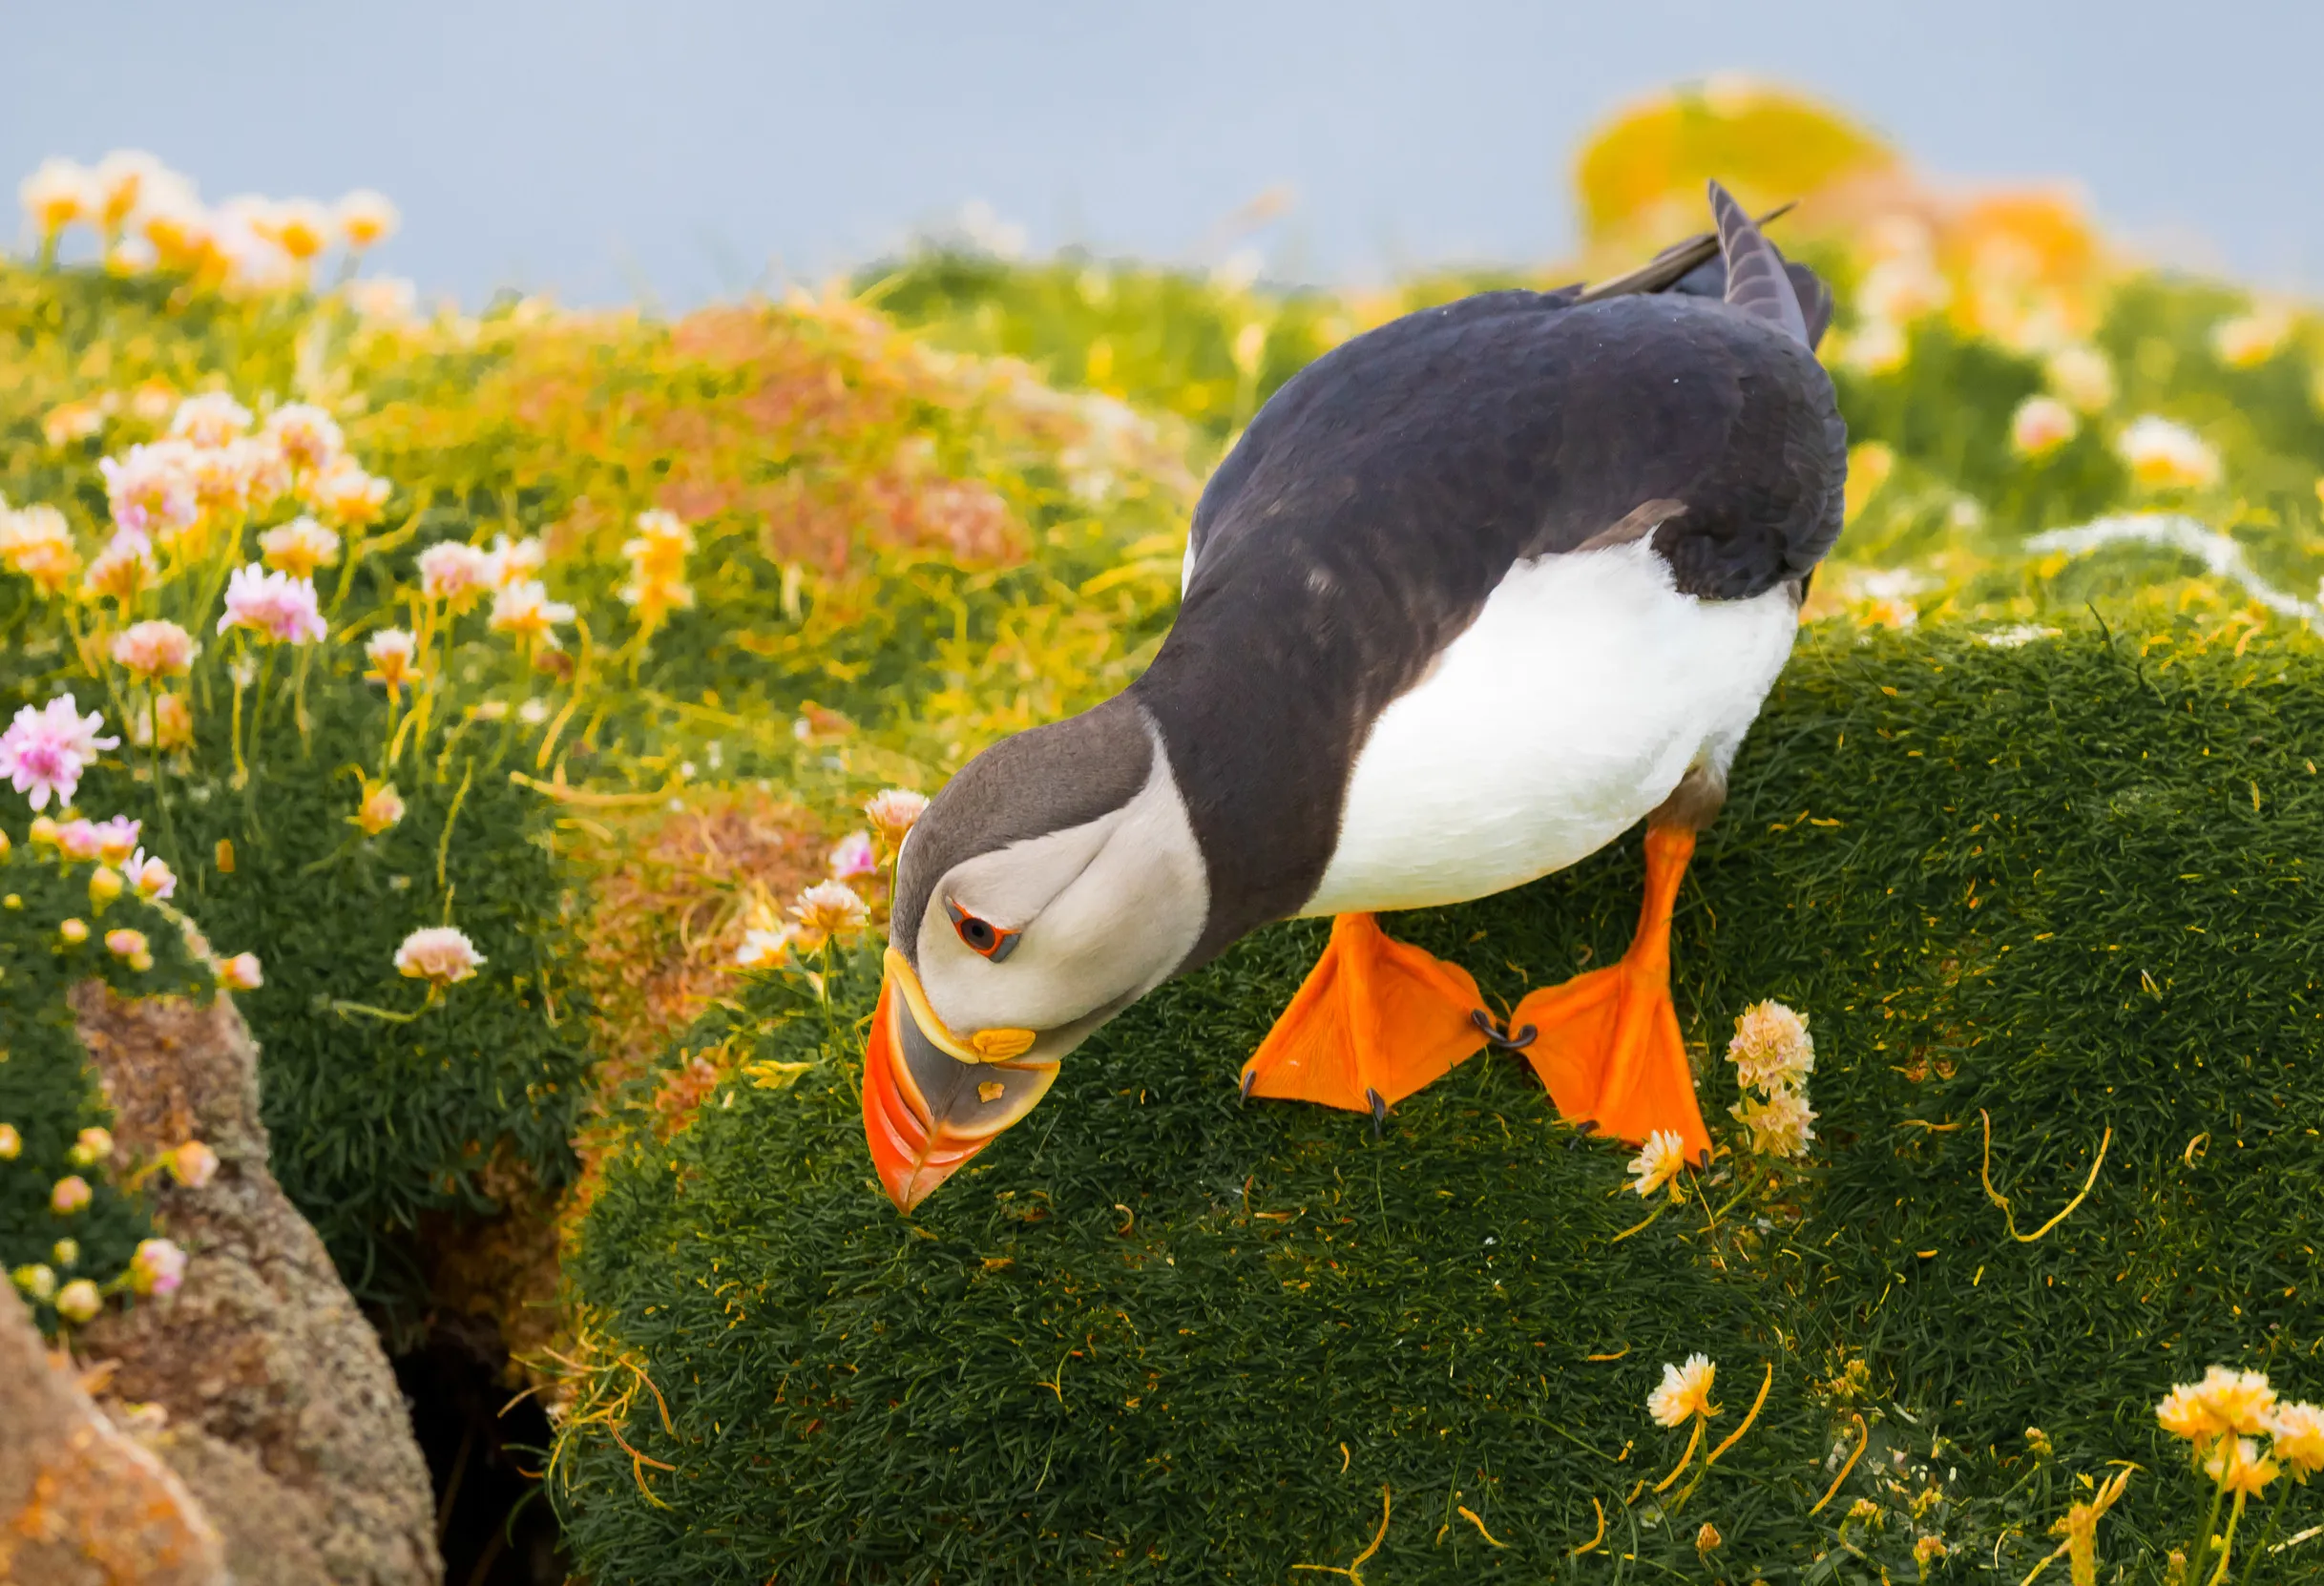 An adult Puffin looking down into a burrow on a bed of flowery grass.